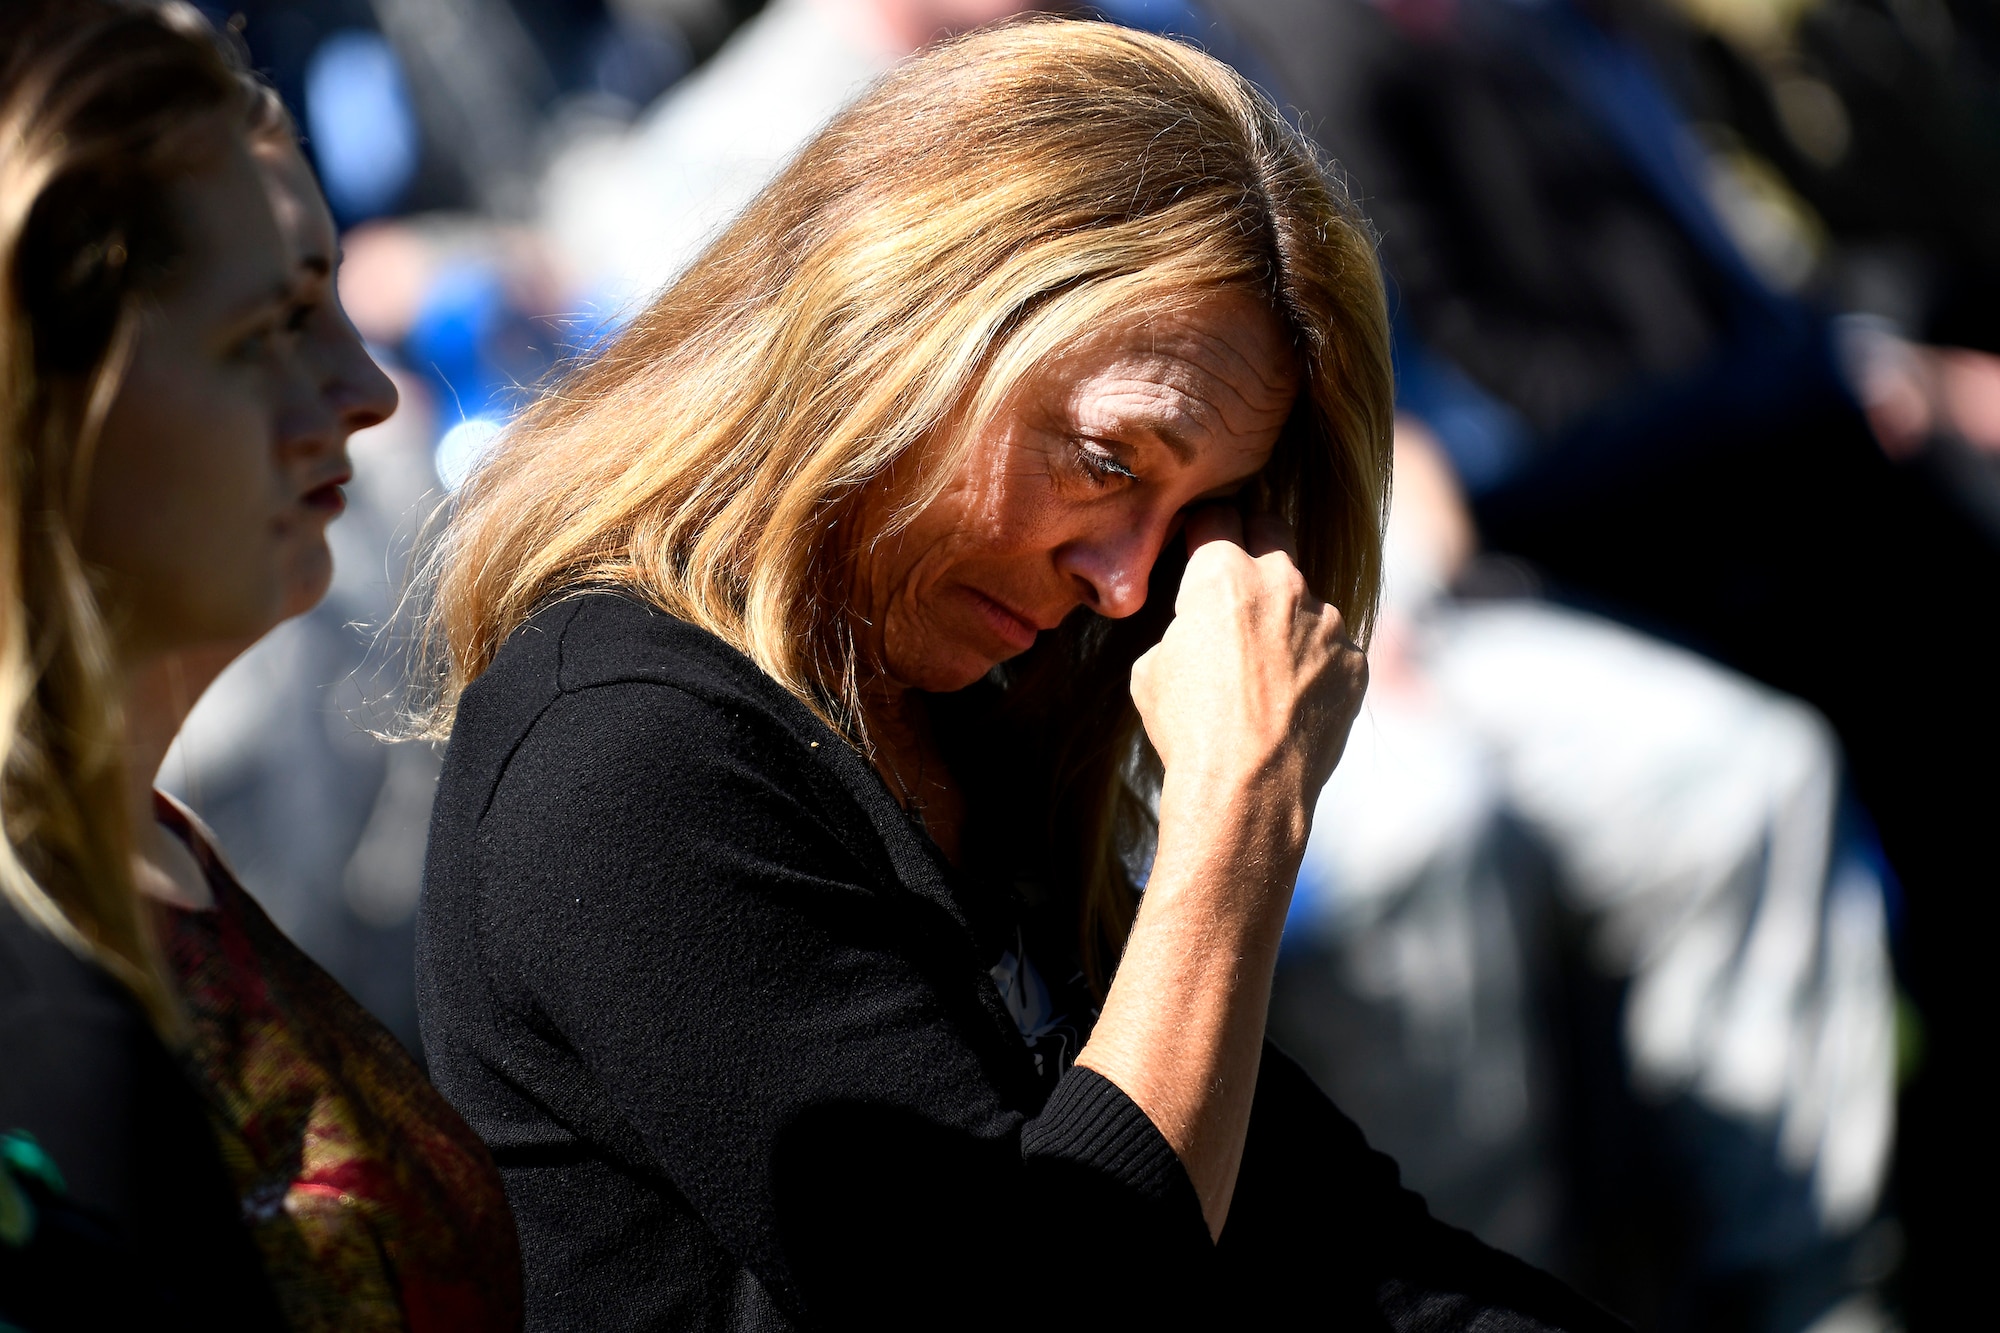 Valerie Nessel, widow of Master Sgt. John Chapman, attends Chapman’s name unveiling ceremony at the Air Force Memorial in Arlington, Va., Aug. 24, 2018. Chapman was posthumously awarded the Medal of Honor for actions on Takur Ghar Mountain in Afghanistan March 4, 2002. An elite special operations team was ambushed by the enemy and came under heavy fire from multiple directions. Chapman immediately charged an enemy bunker through thigh-deep snow and killed all enemy occupants. Courageously moving from cover to assault a second machine gun bunker, he was injured by enemy fire. Despite severe wounds, he fought relentlessly, sustaining a violent engagement with multiple enemy personnel before making the ultimate sacrifice. With his last actions he saved the lives of his teammates. (U.S. Air Force photo by Staff Sgt. Rusty Frank)